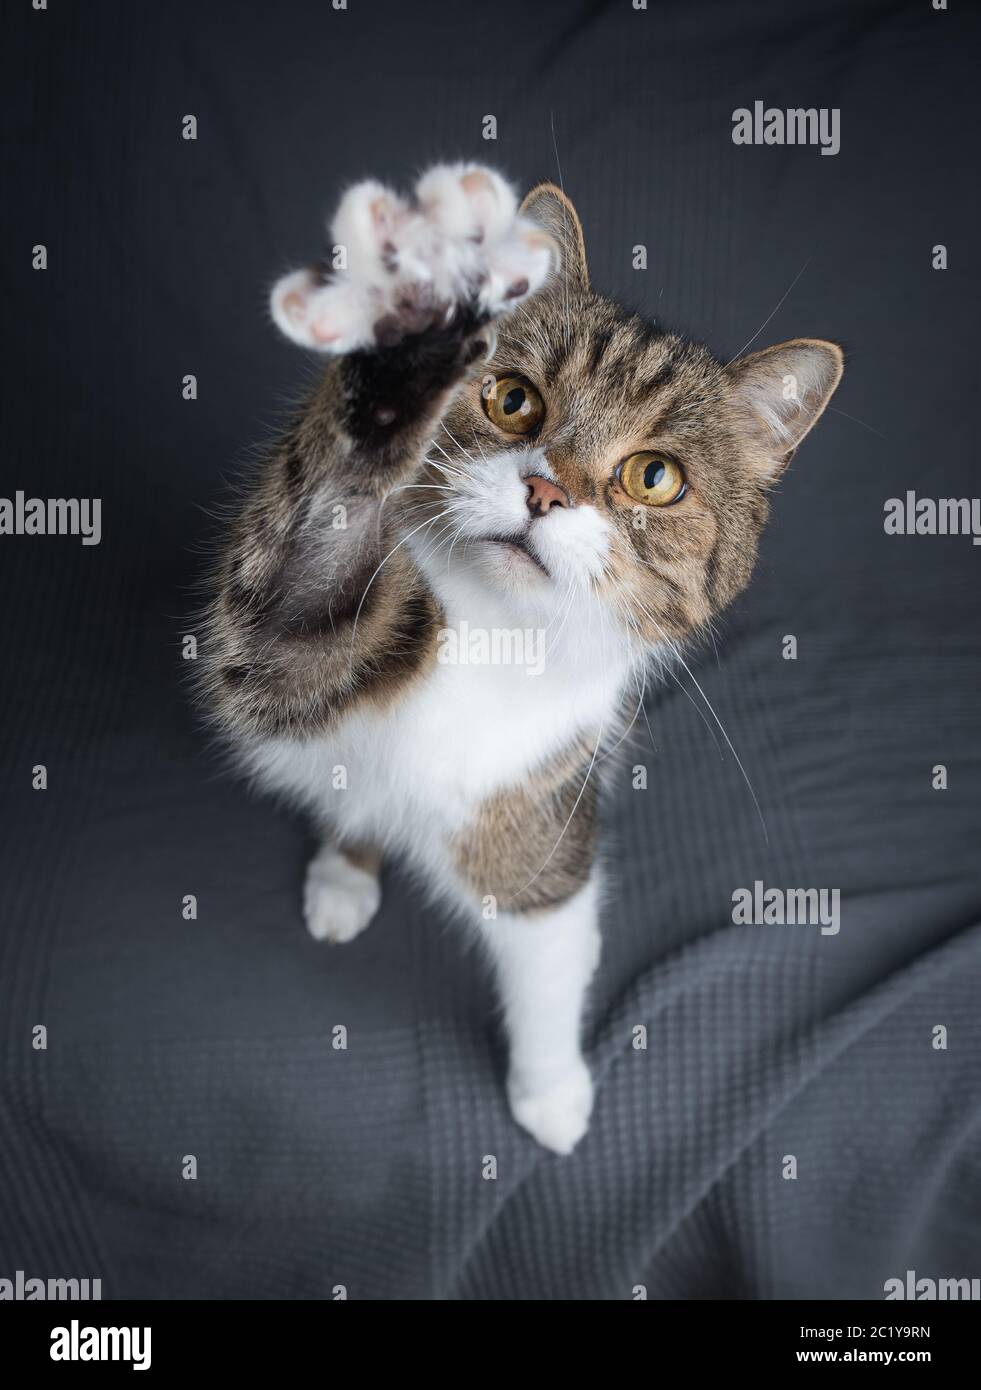 playful tabby british shorthair cat raising the paw to reach cat's toy Stock Photo